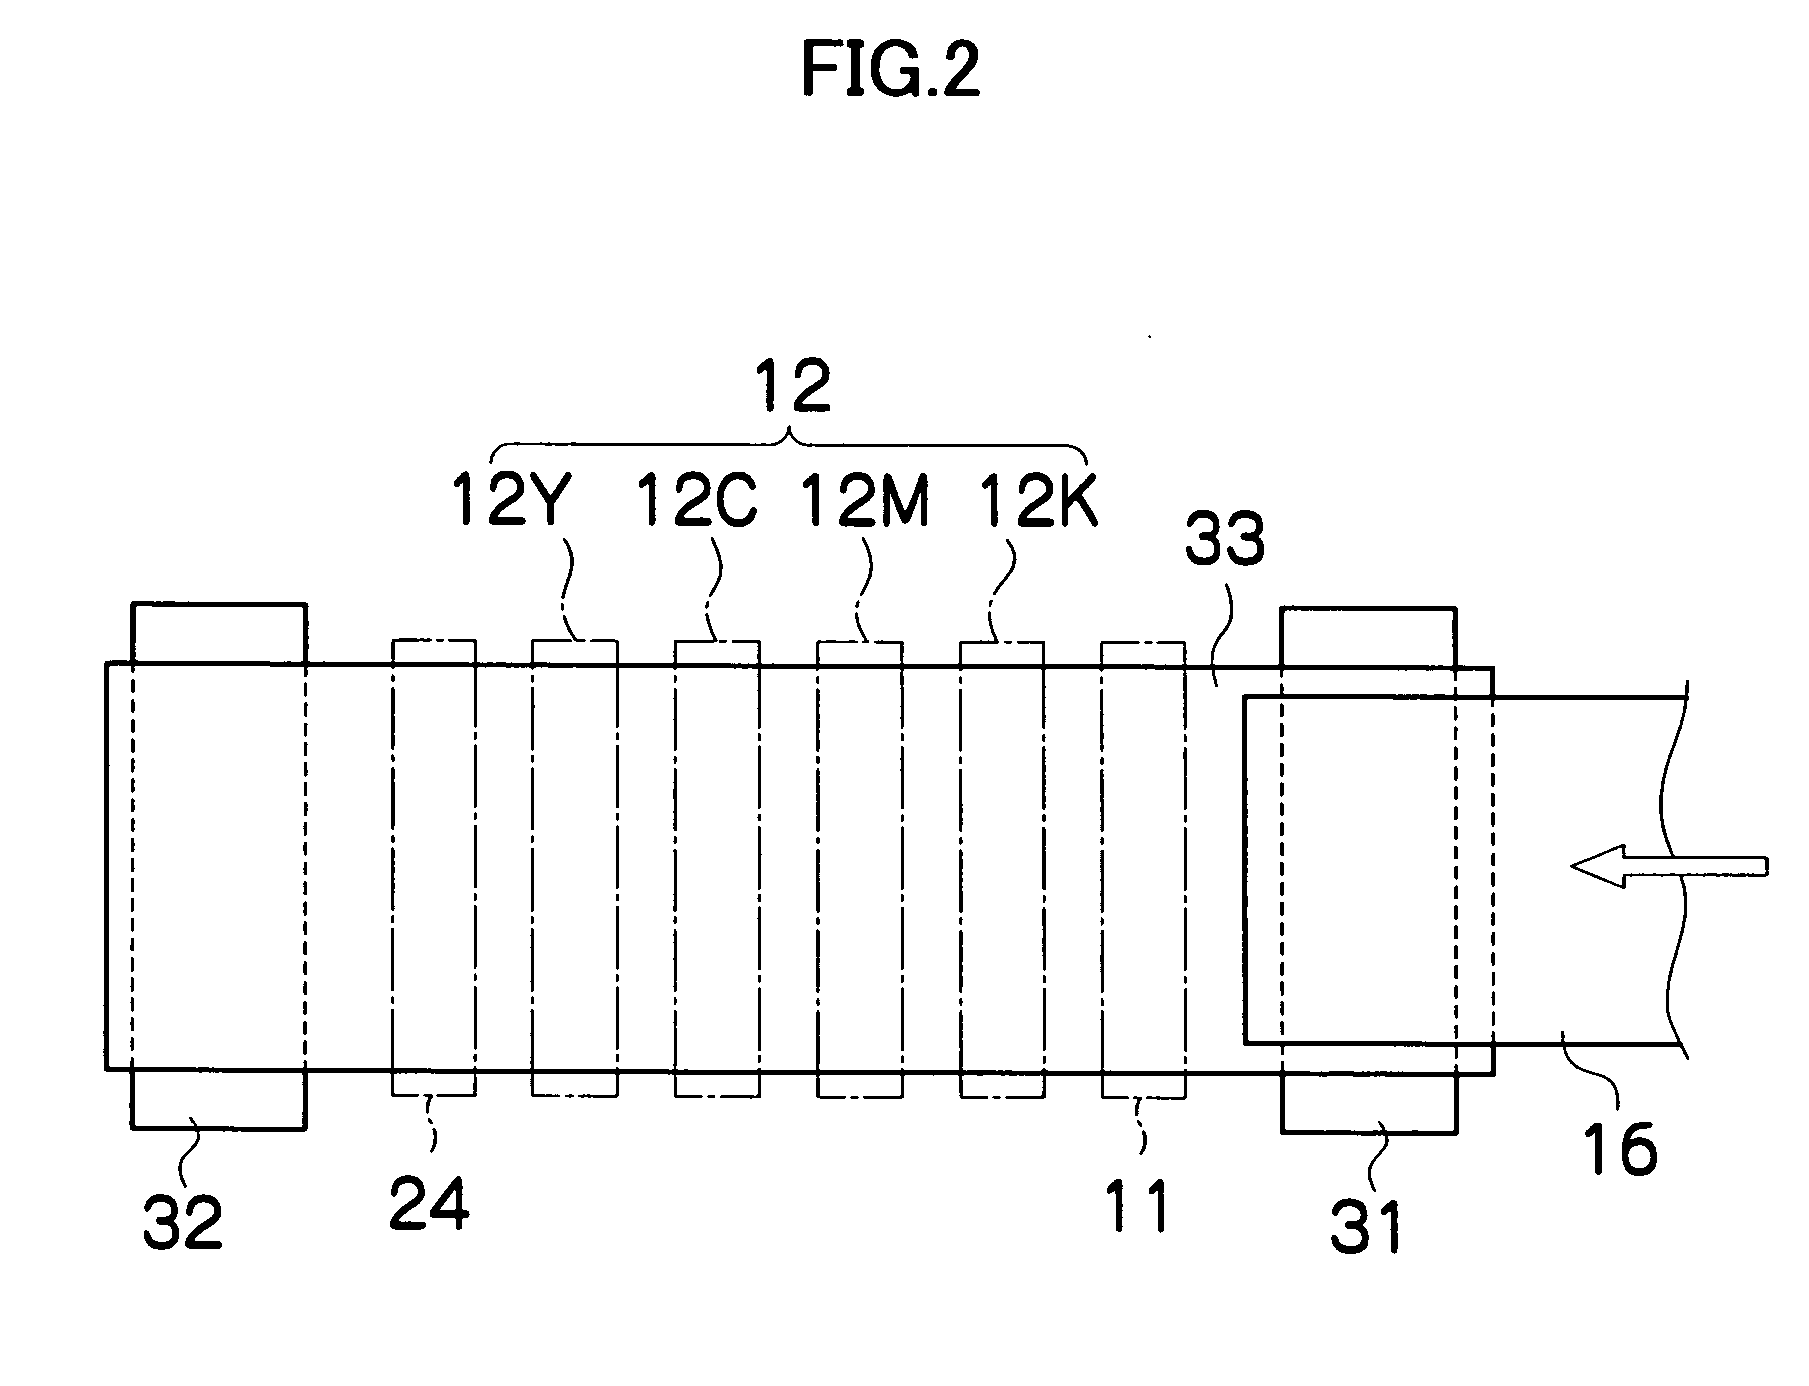 Image forming apparatus and method